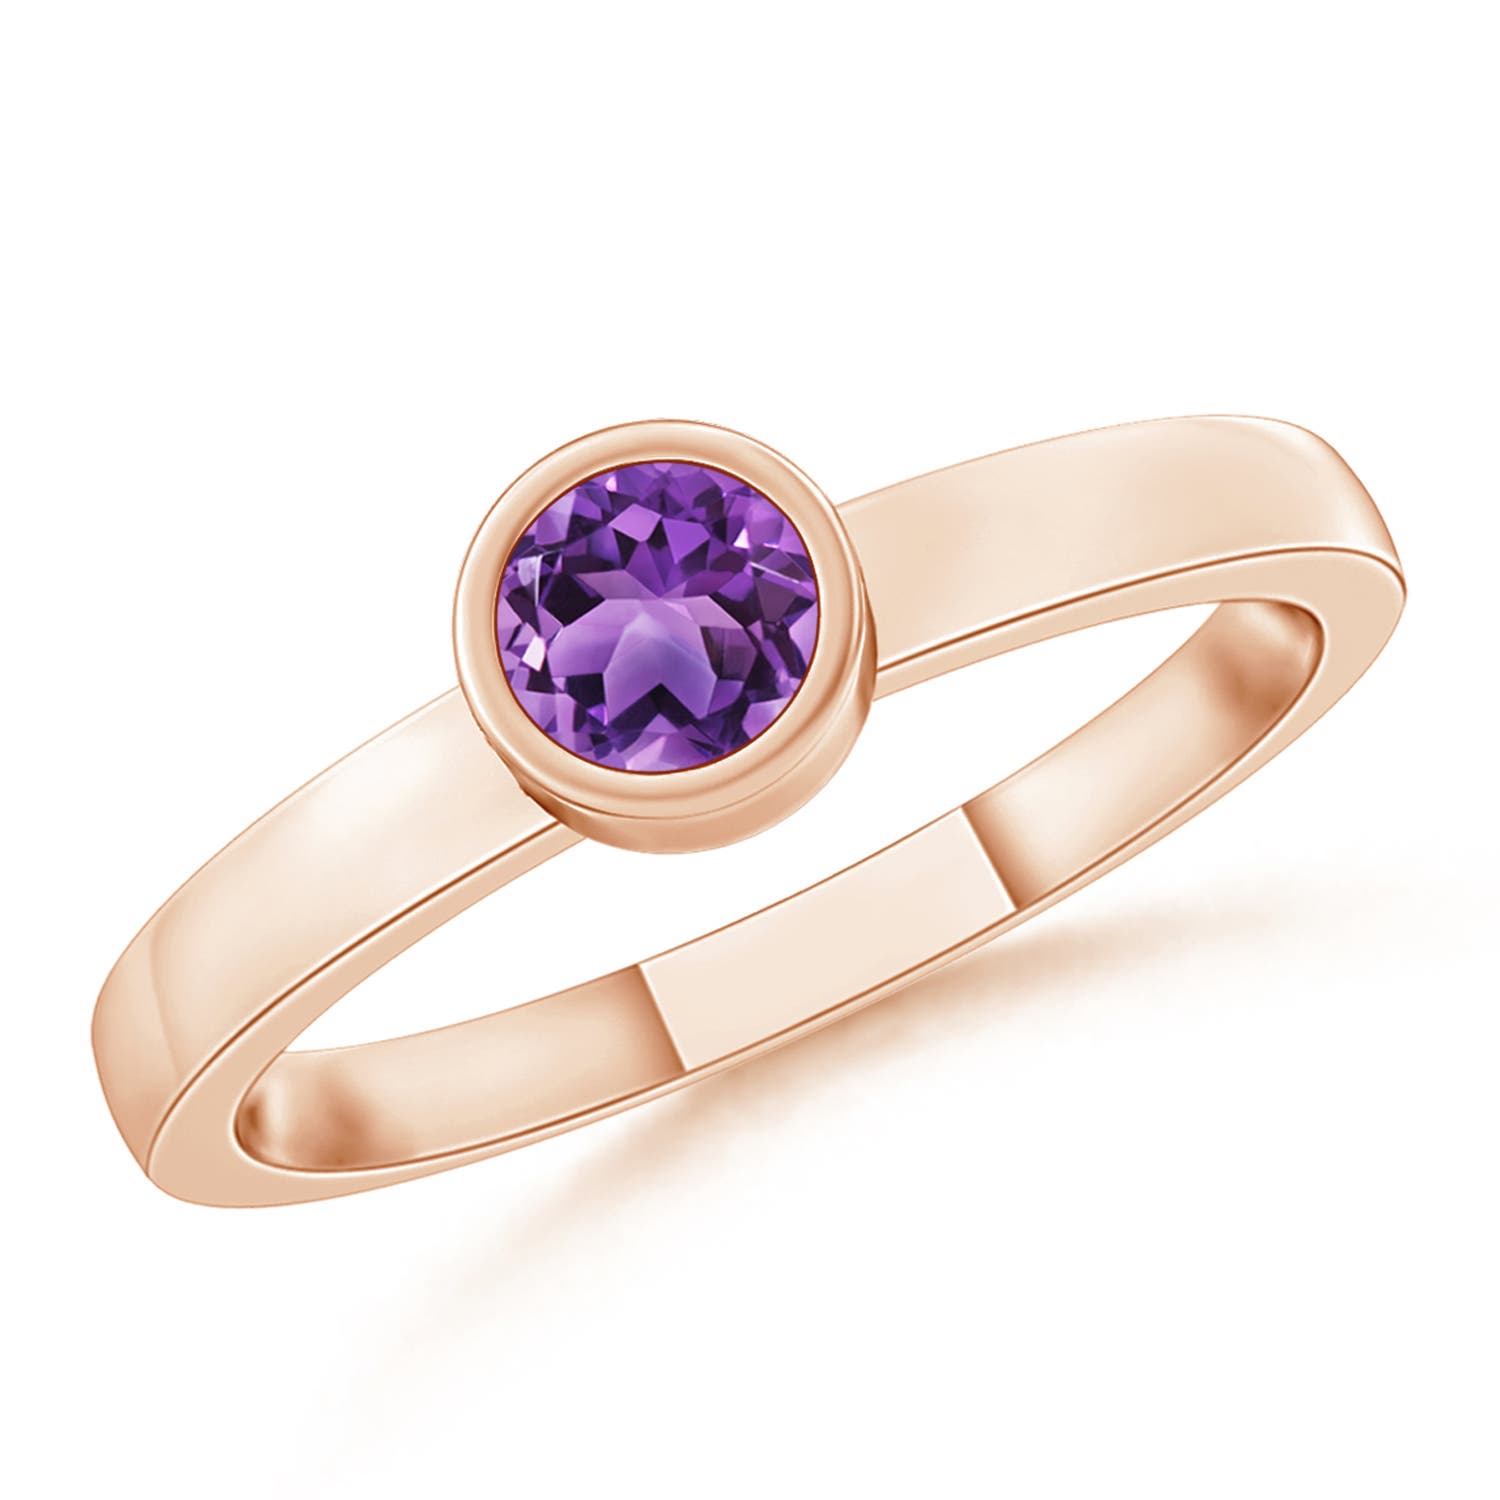 AA - Amethyst / 0.16 CT / 14 KT Rose Gold